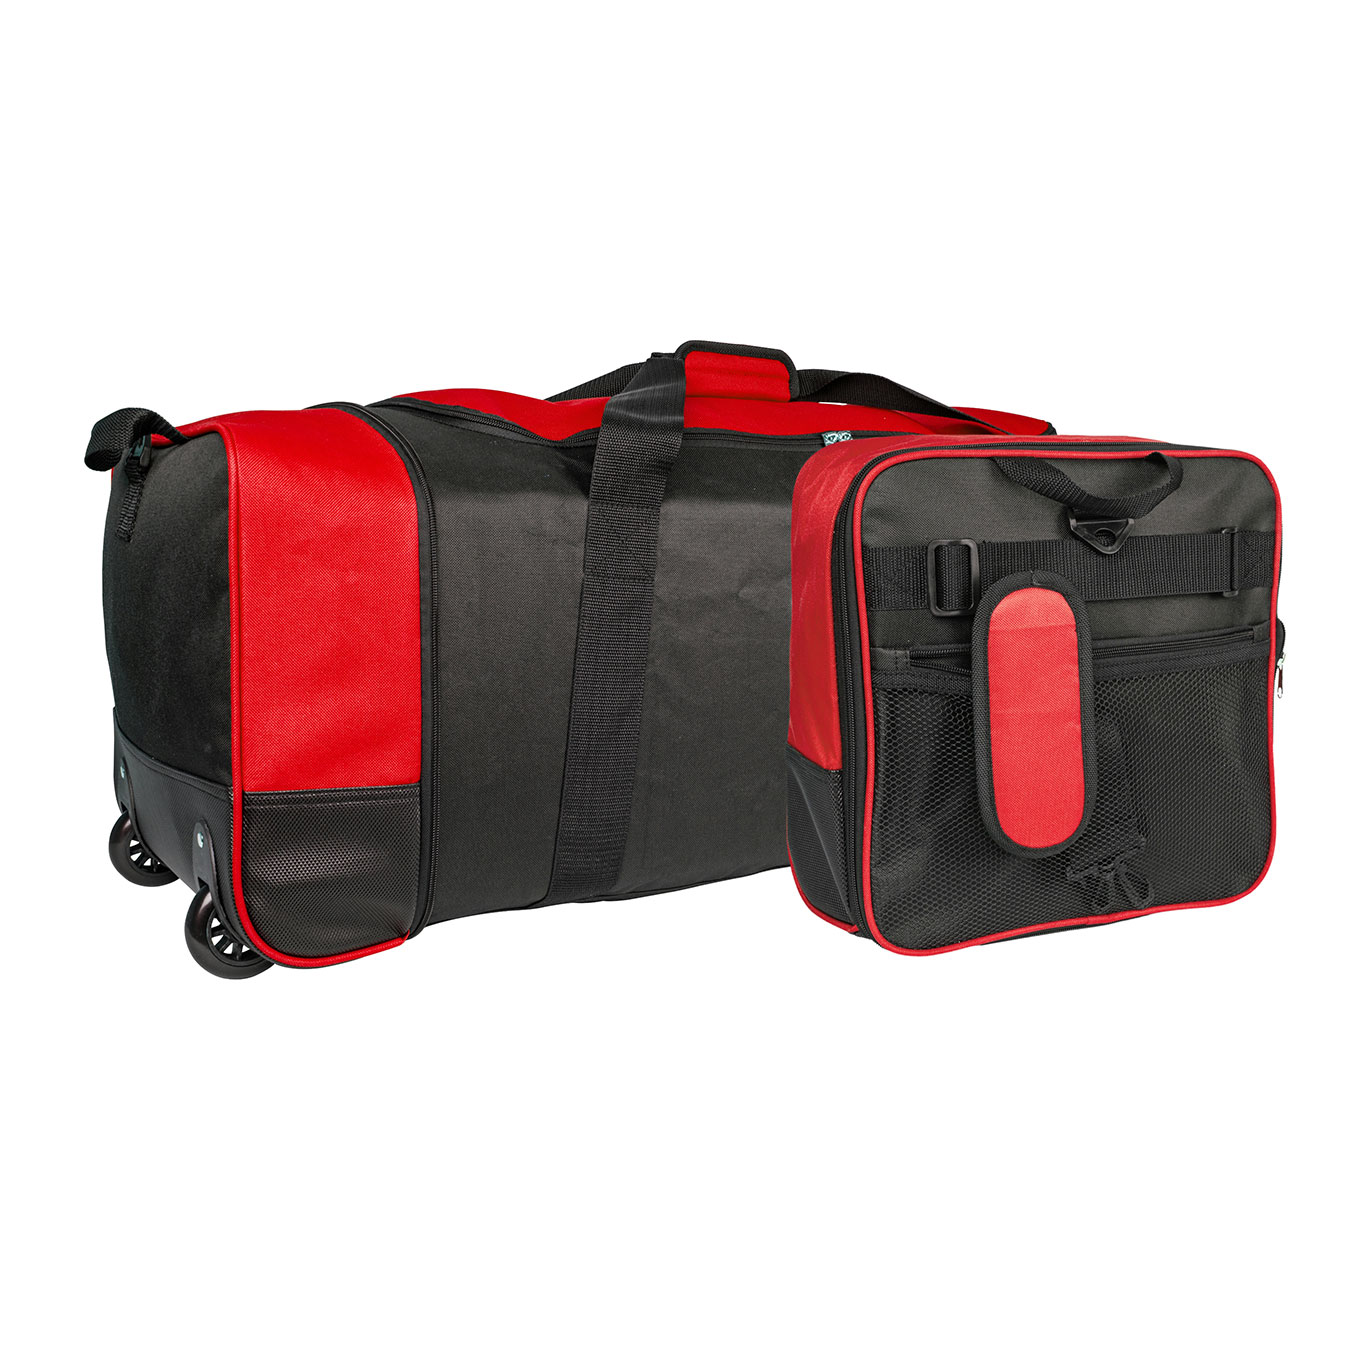 An image of iN Travel Foldable Wheeled Holdall - 80L Luggage Bag (Black/Red)